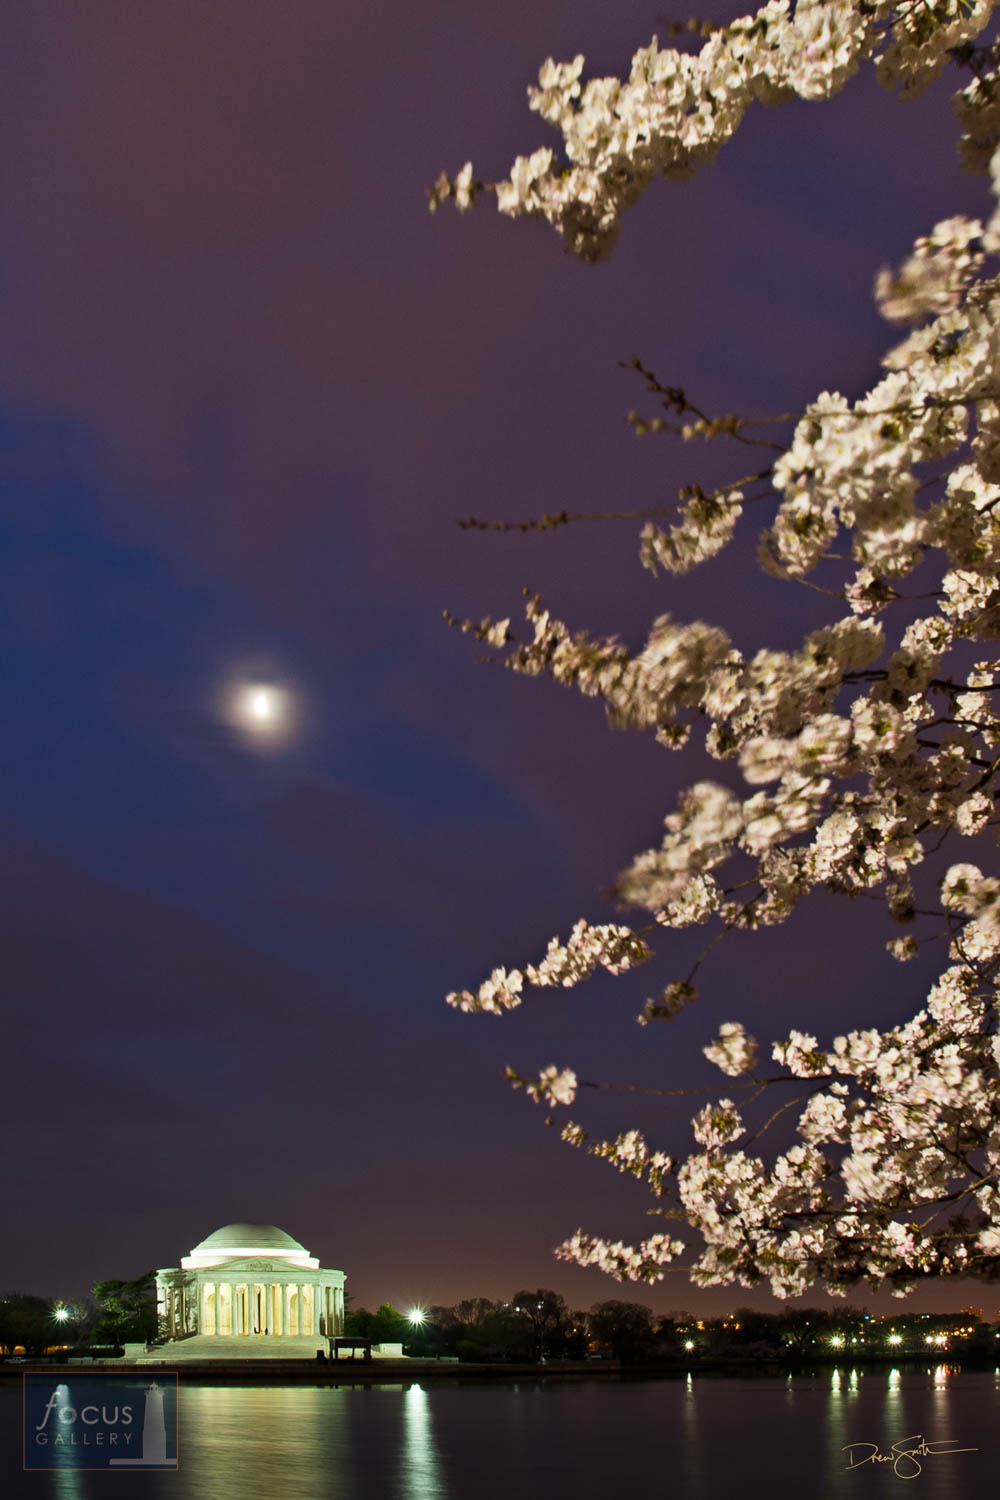 Photo © Drew Smith The moon shines over the Jefferson Memorial and cherry blossoms.